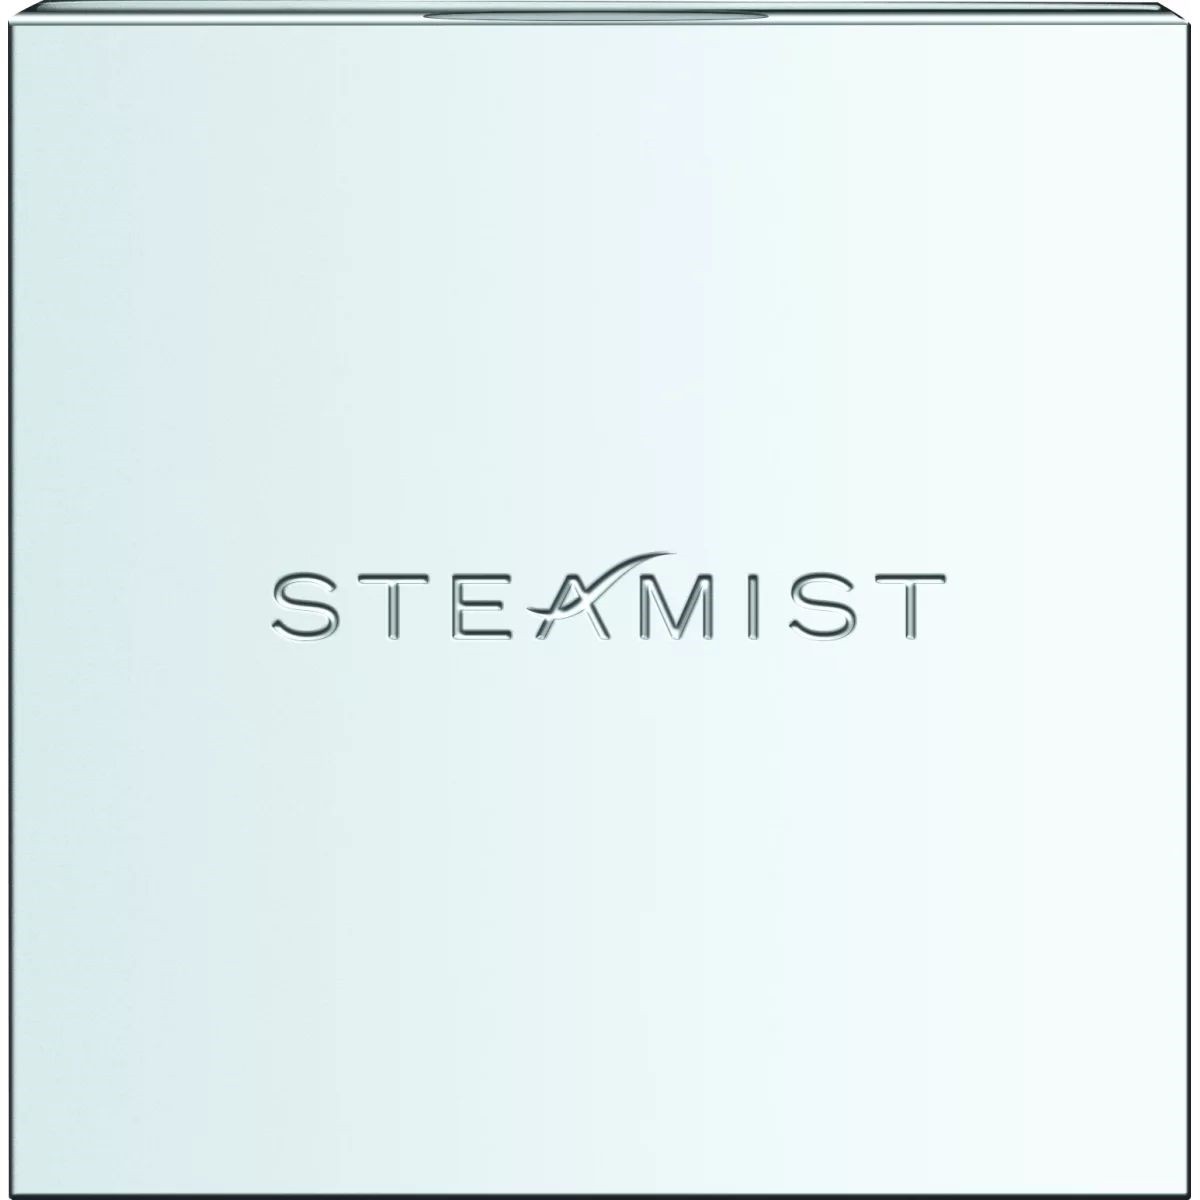 STEAMIST 3199M WALL MOUNT SQUARE MODERN STYLE STEAMHEAD